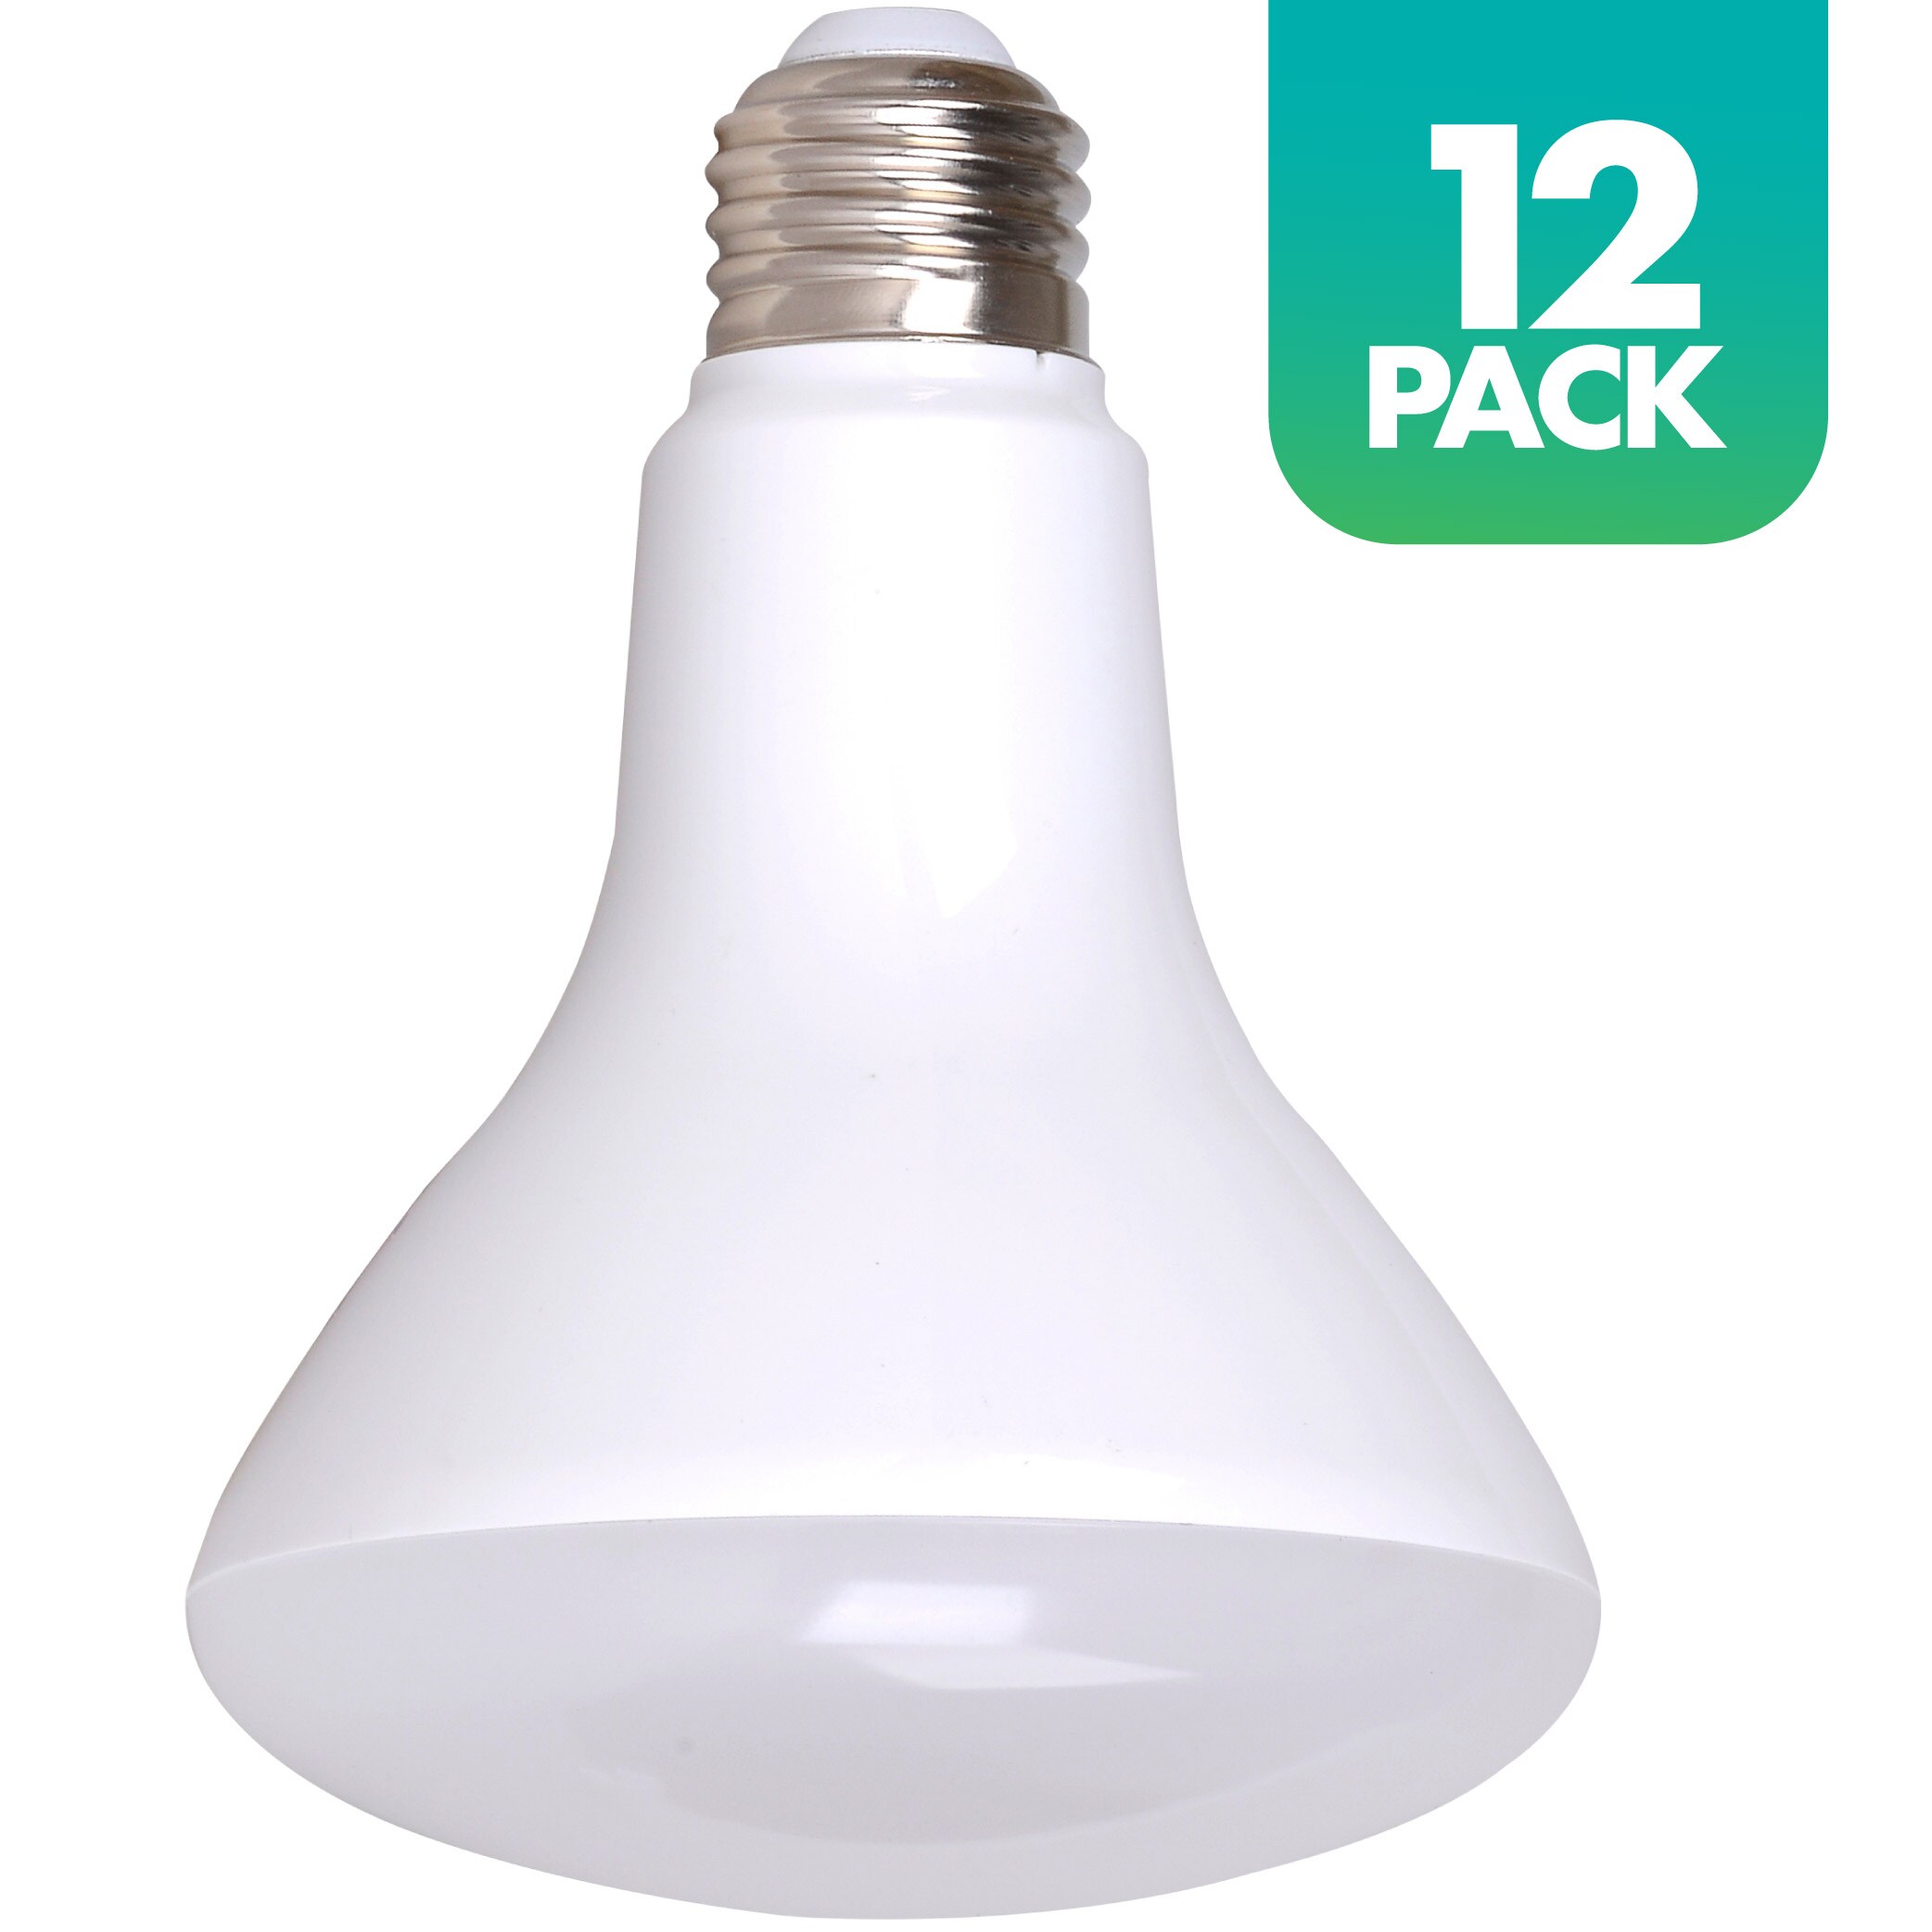 Great Value 100W Equivalent A21 LED Light Bulb, High CRI, Dimmable, Soft  White, For CA Residents, 4-Pack 